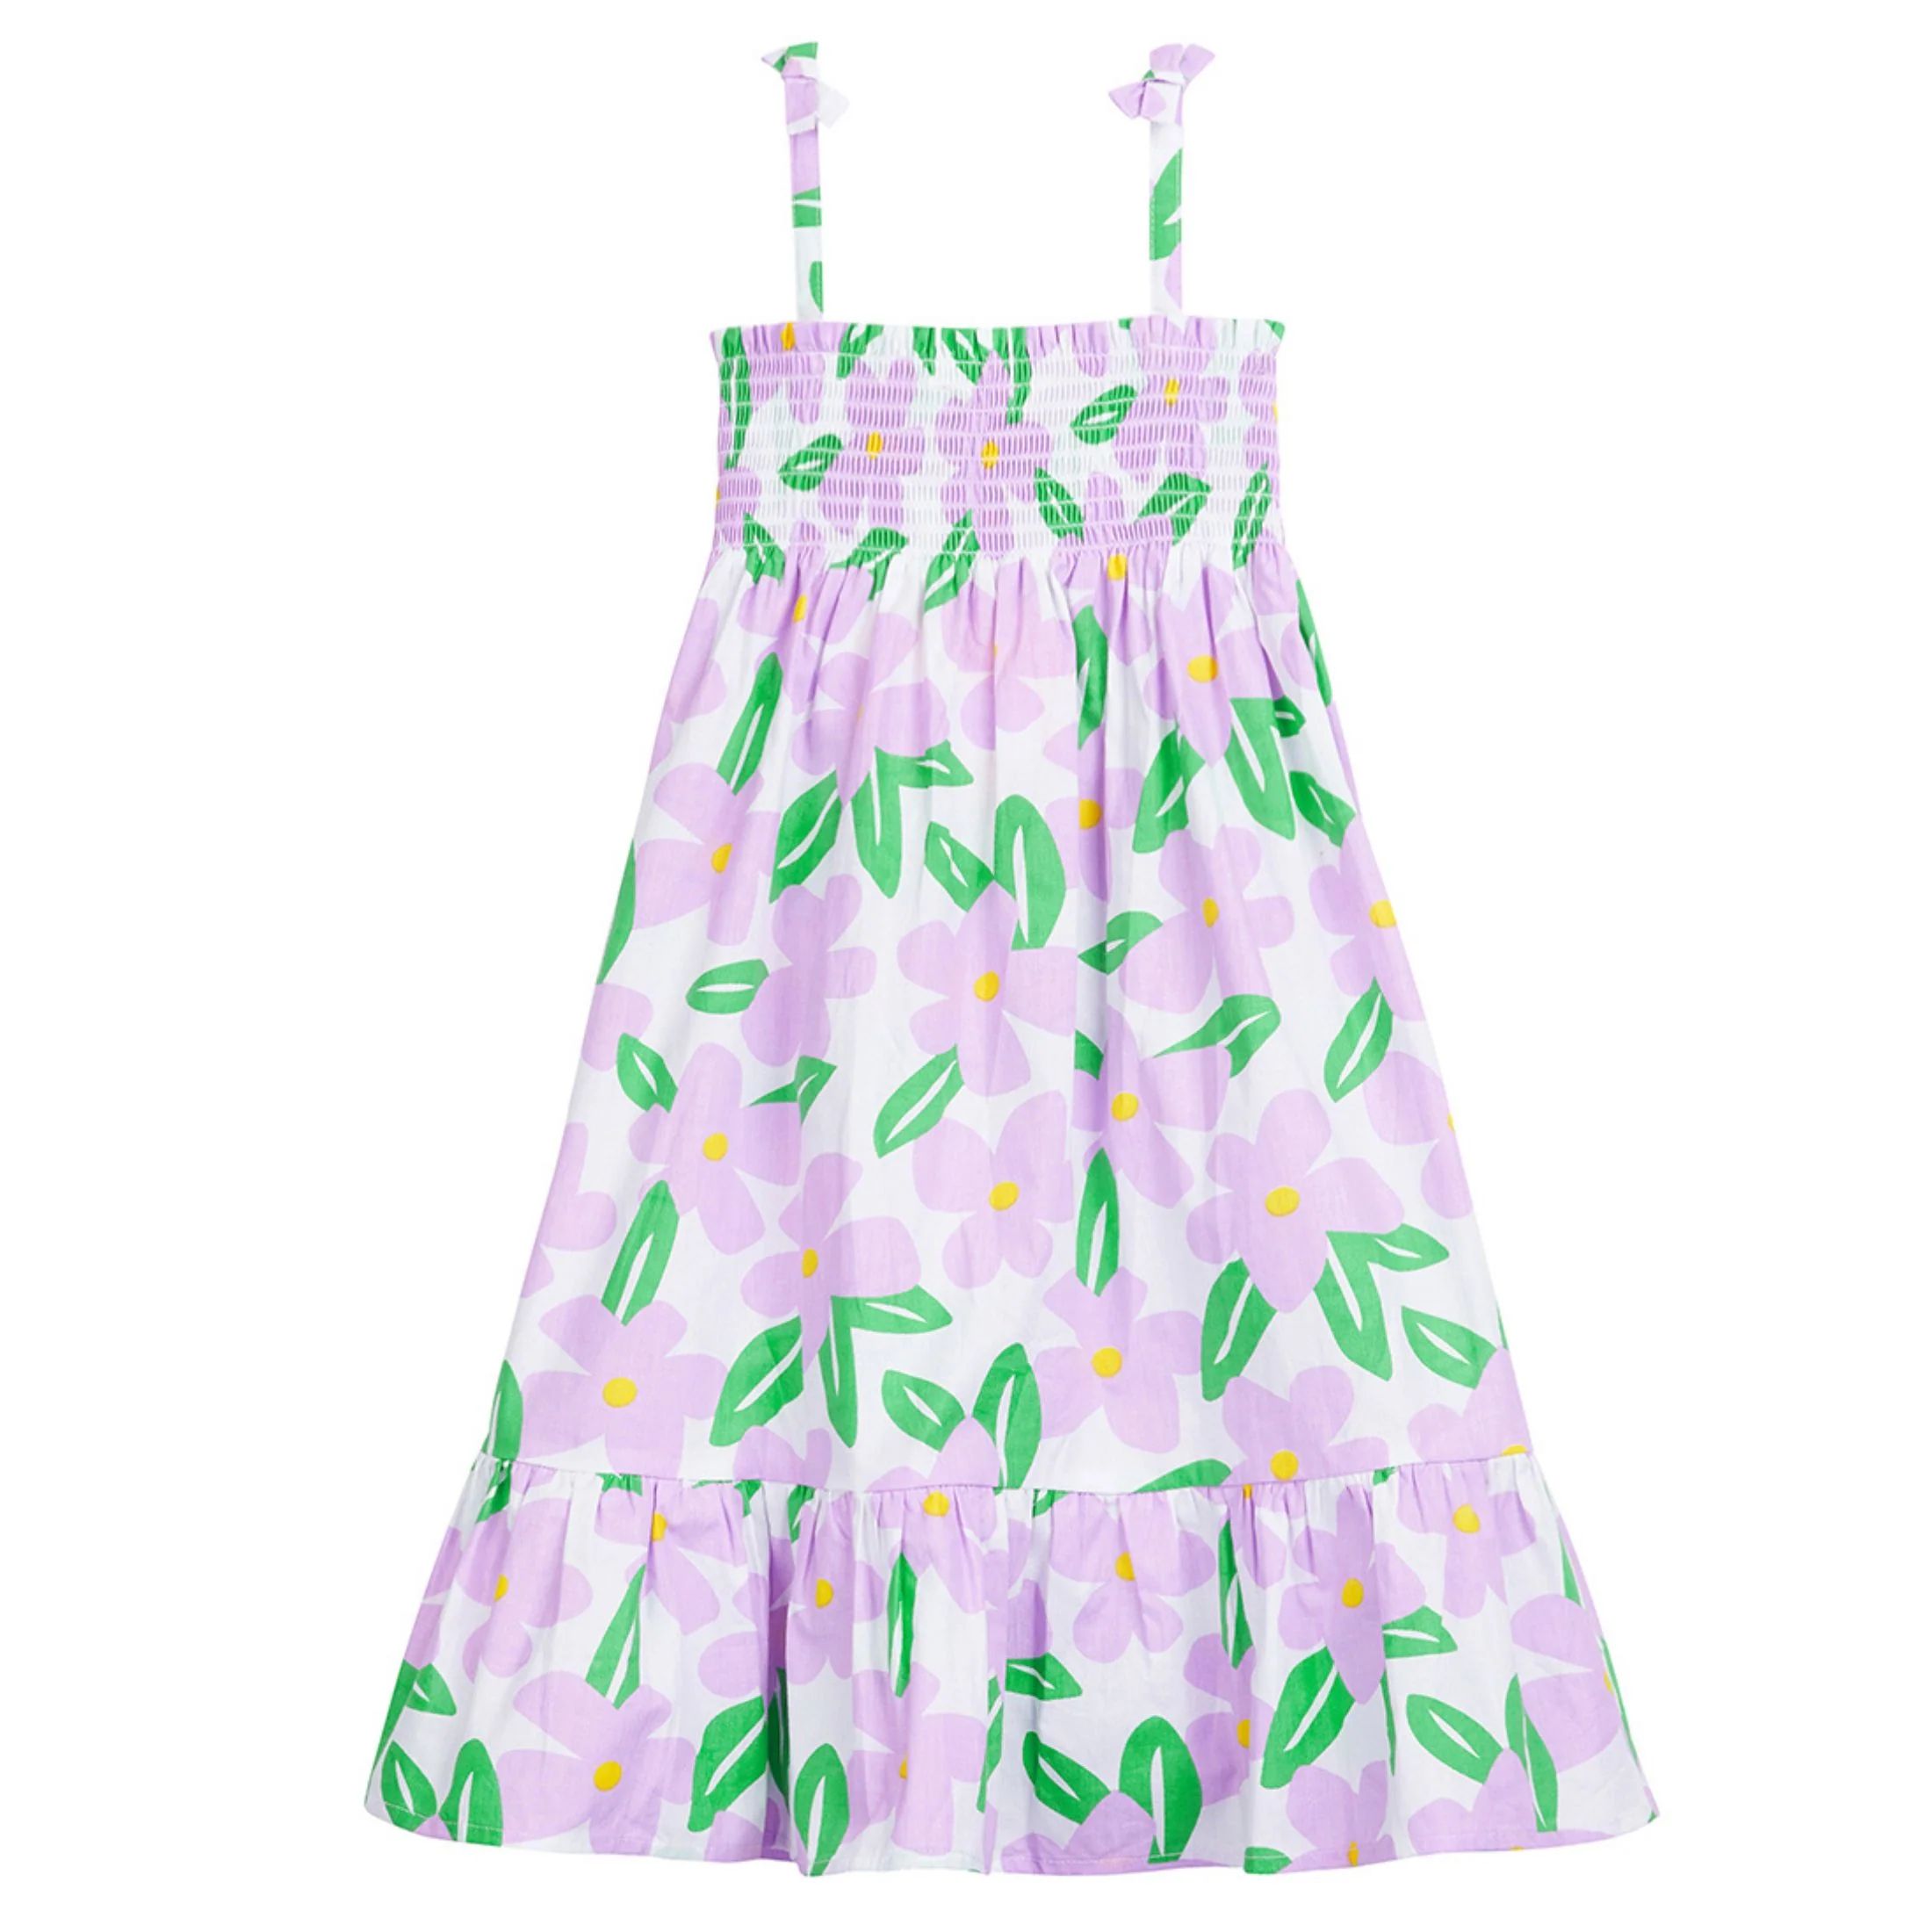 Lucy Dress - Wisteria Melrose Floral | BISBY Kids